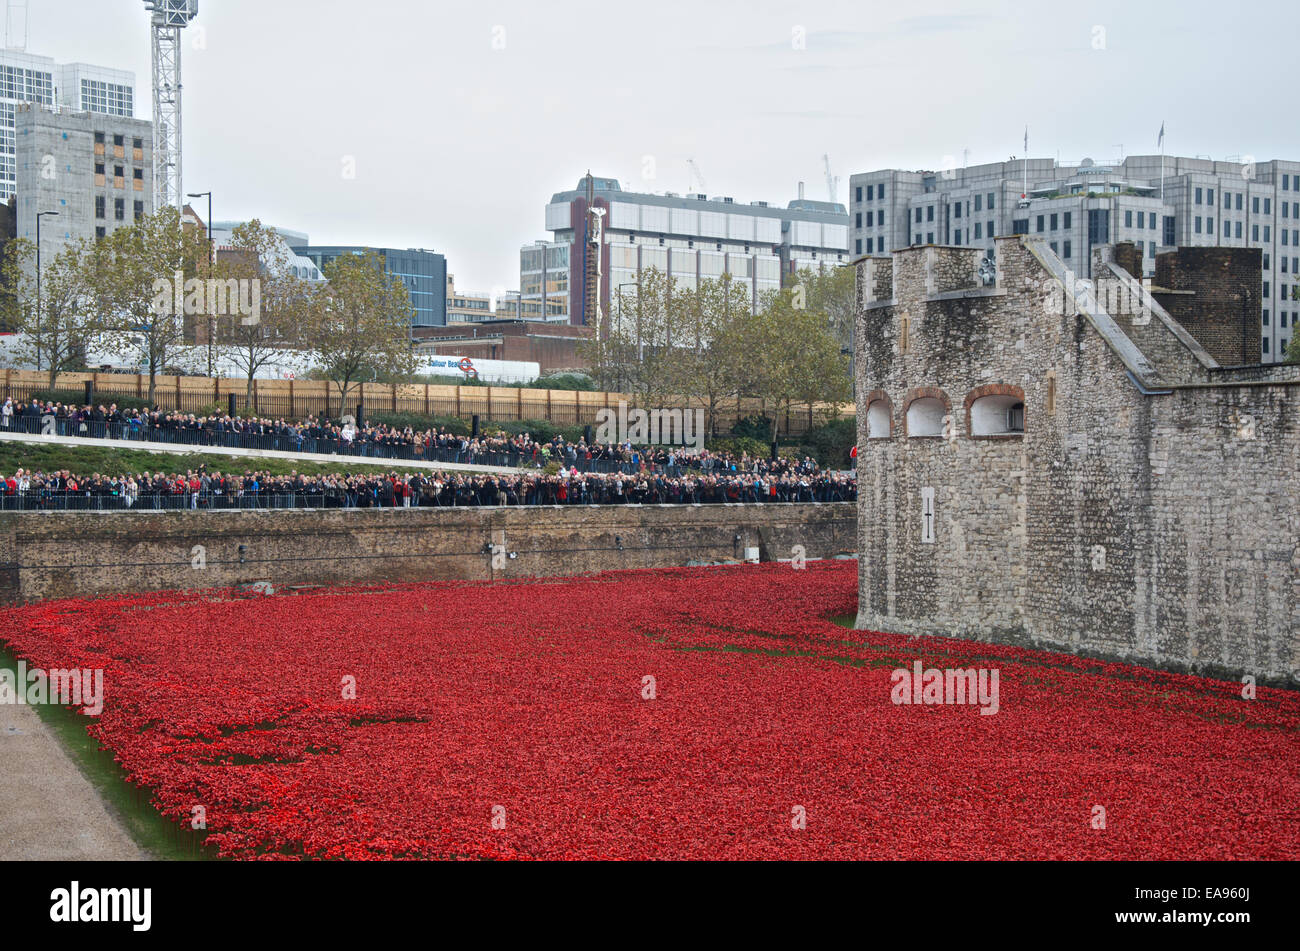 Crowds gather on the morning of Remembrance Sunday 9th November 2014 at the Tower of London, to see the poppies in the moat.The art instillation entitled Blood Swept Lands and Seas of Red which commemorates the centenary of the start of WW1 in 1914 has attracted millions of visitors. Stock Photo